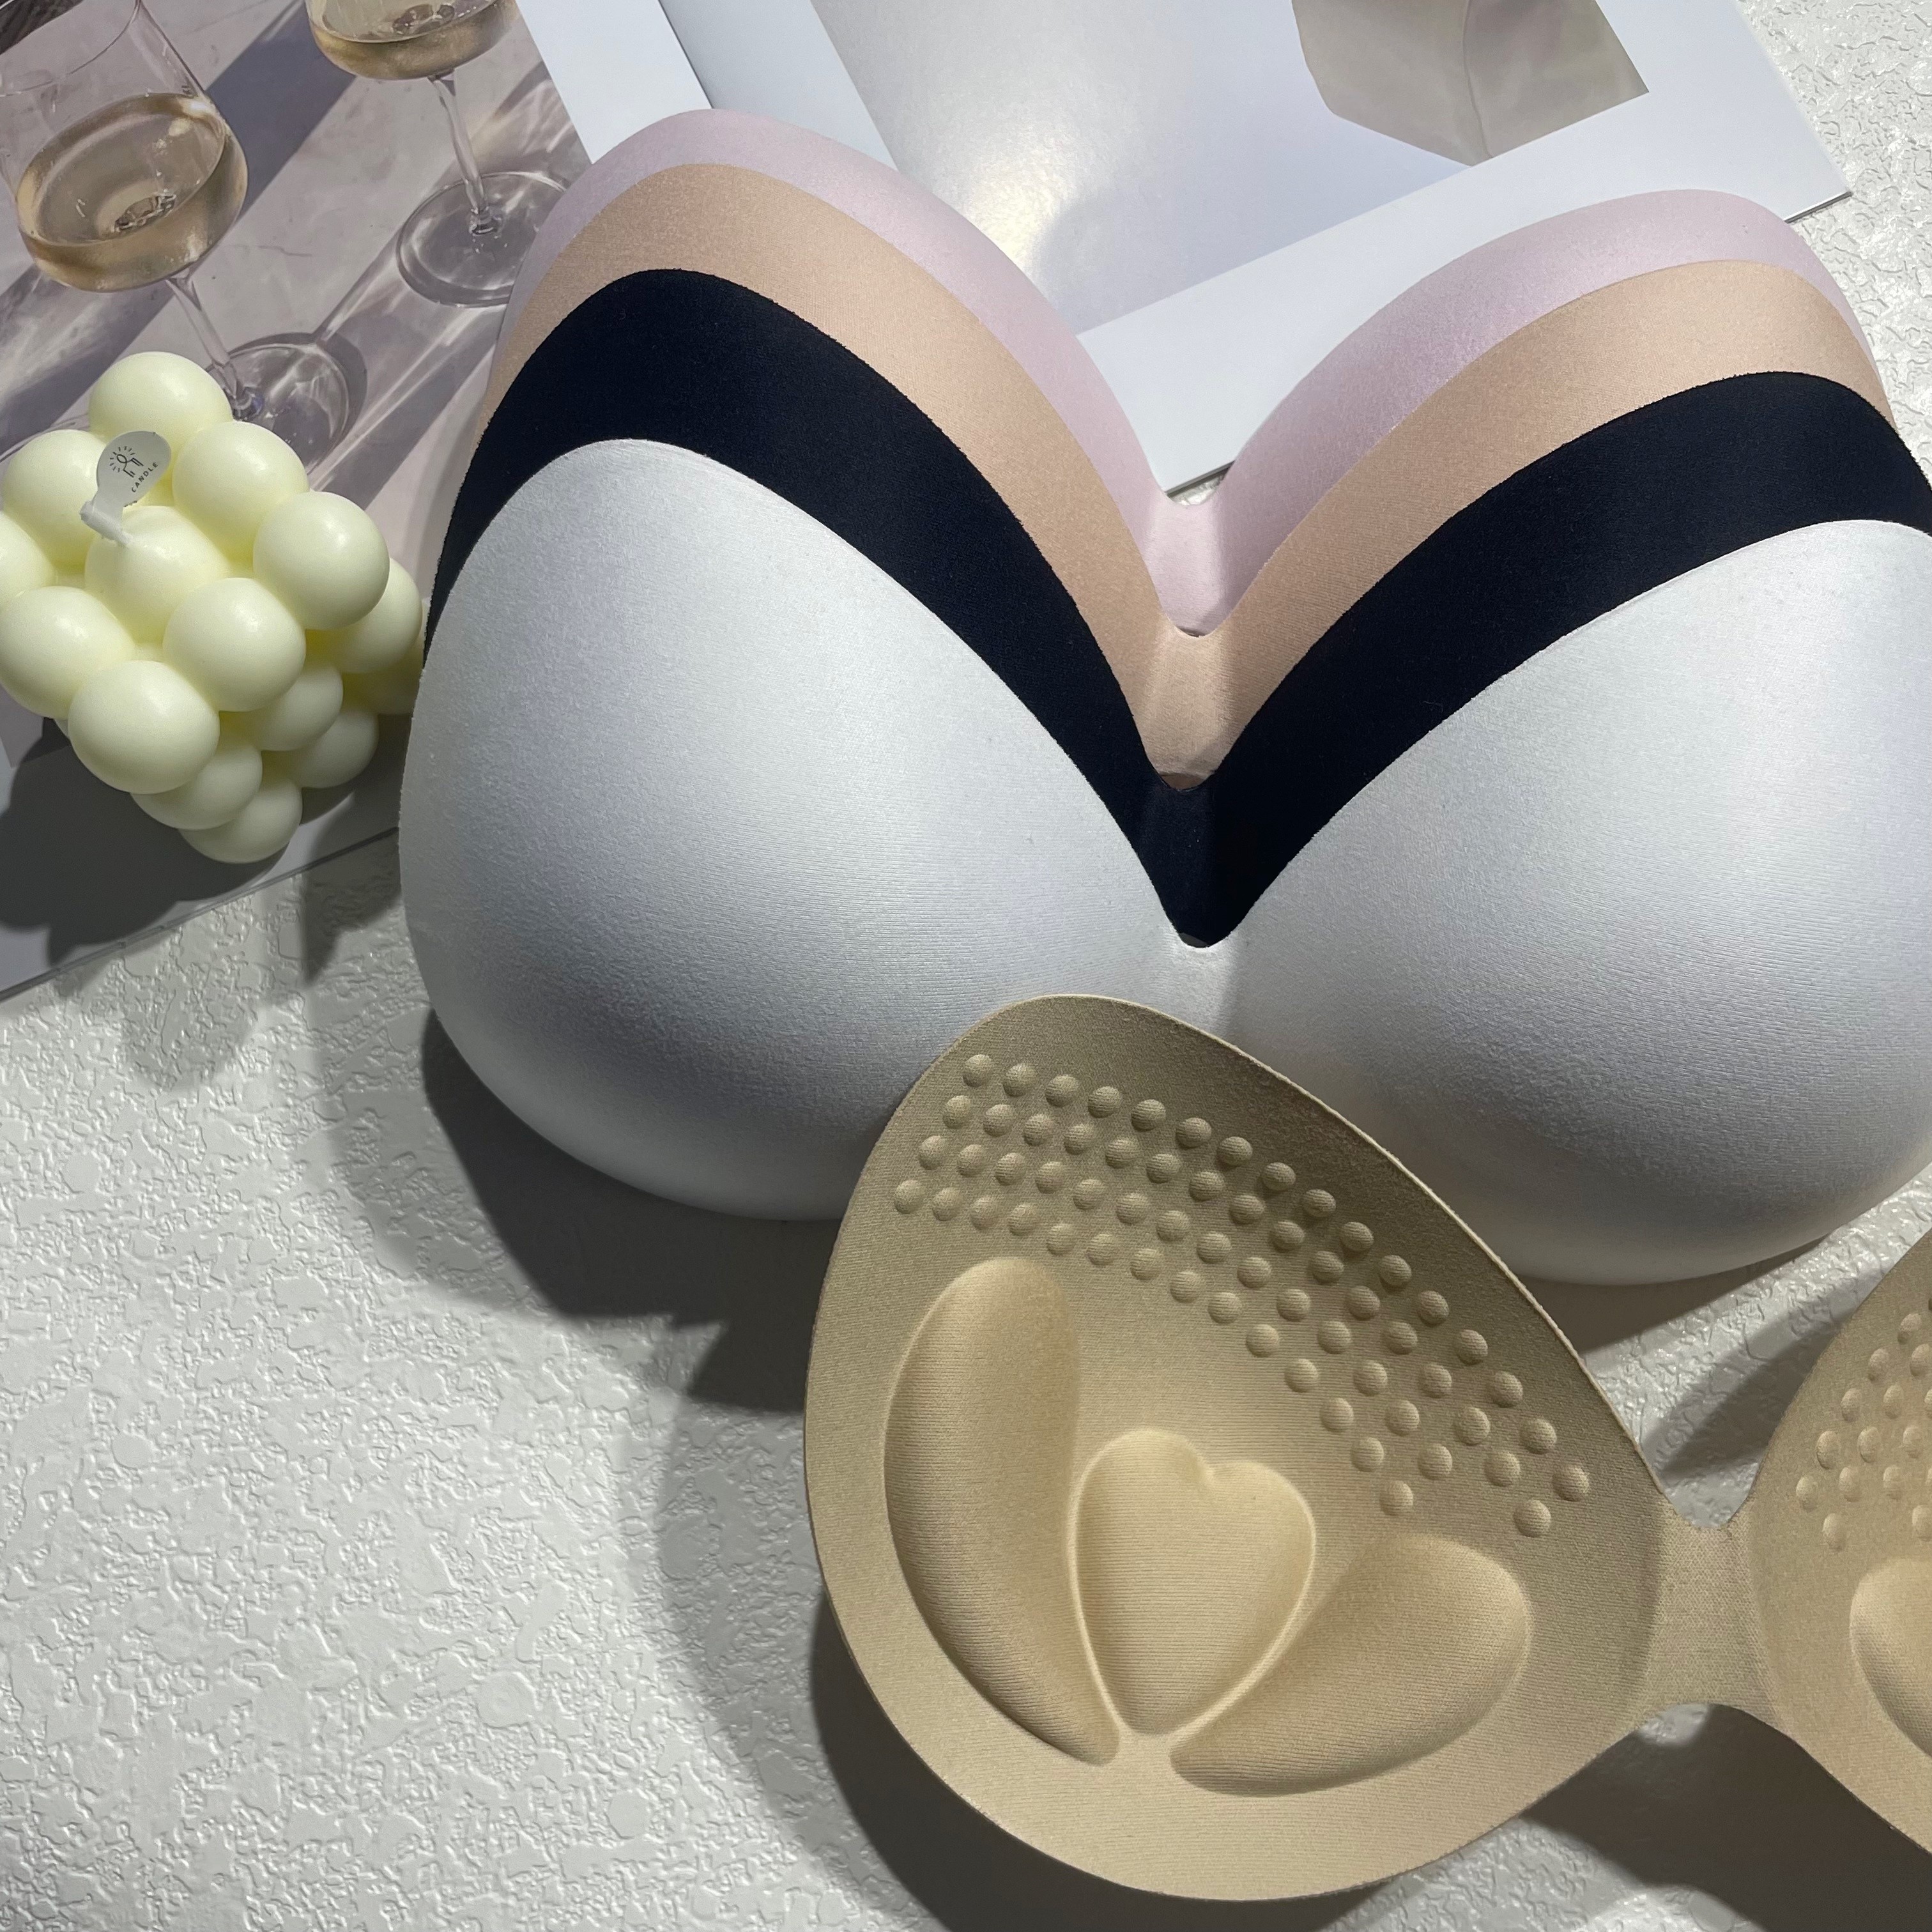 Women's Bra Pads Inserts Push Up Padding for Swimsuits,Sports Bras,& Tops  One Piece Sponge Insert